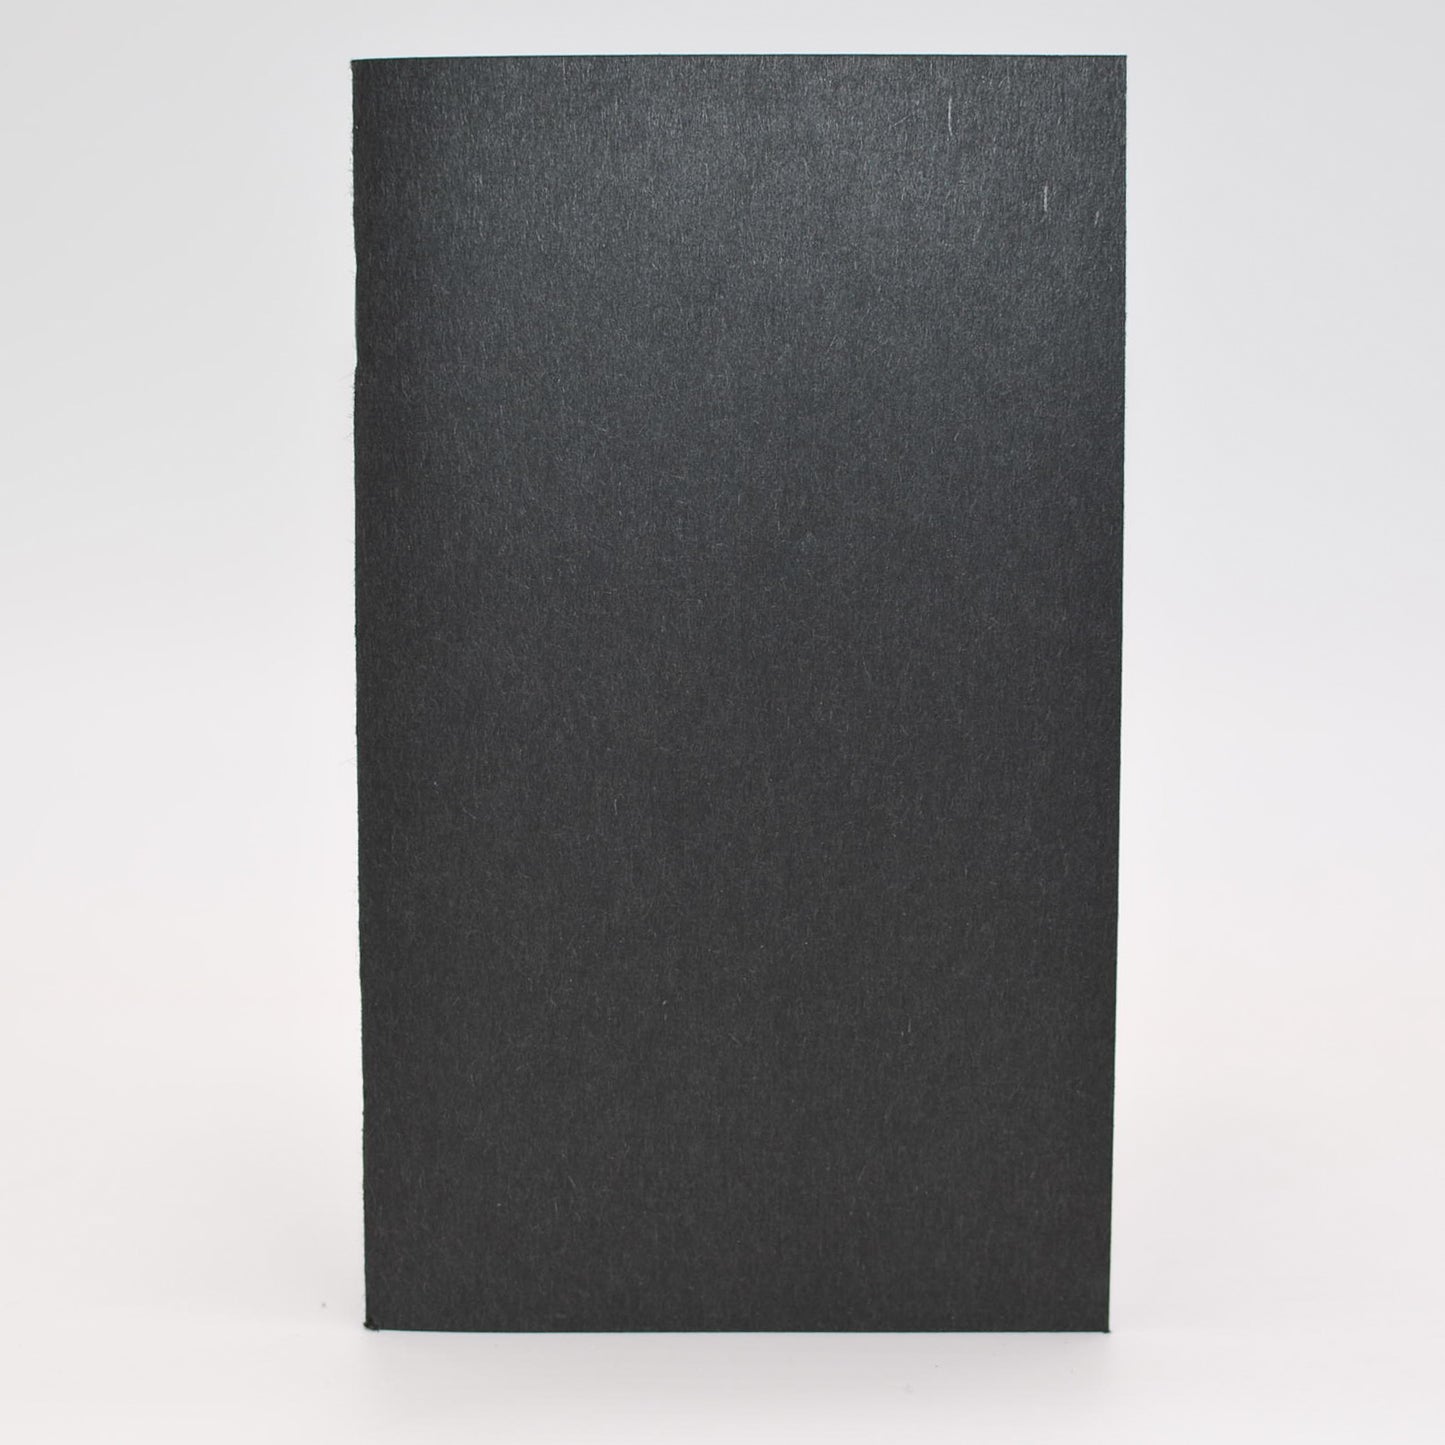 Password Book: 3-5/8 x 6 with Discrete Cover and Alphabet Labeled Pages